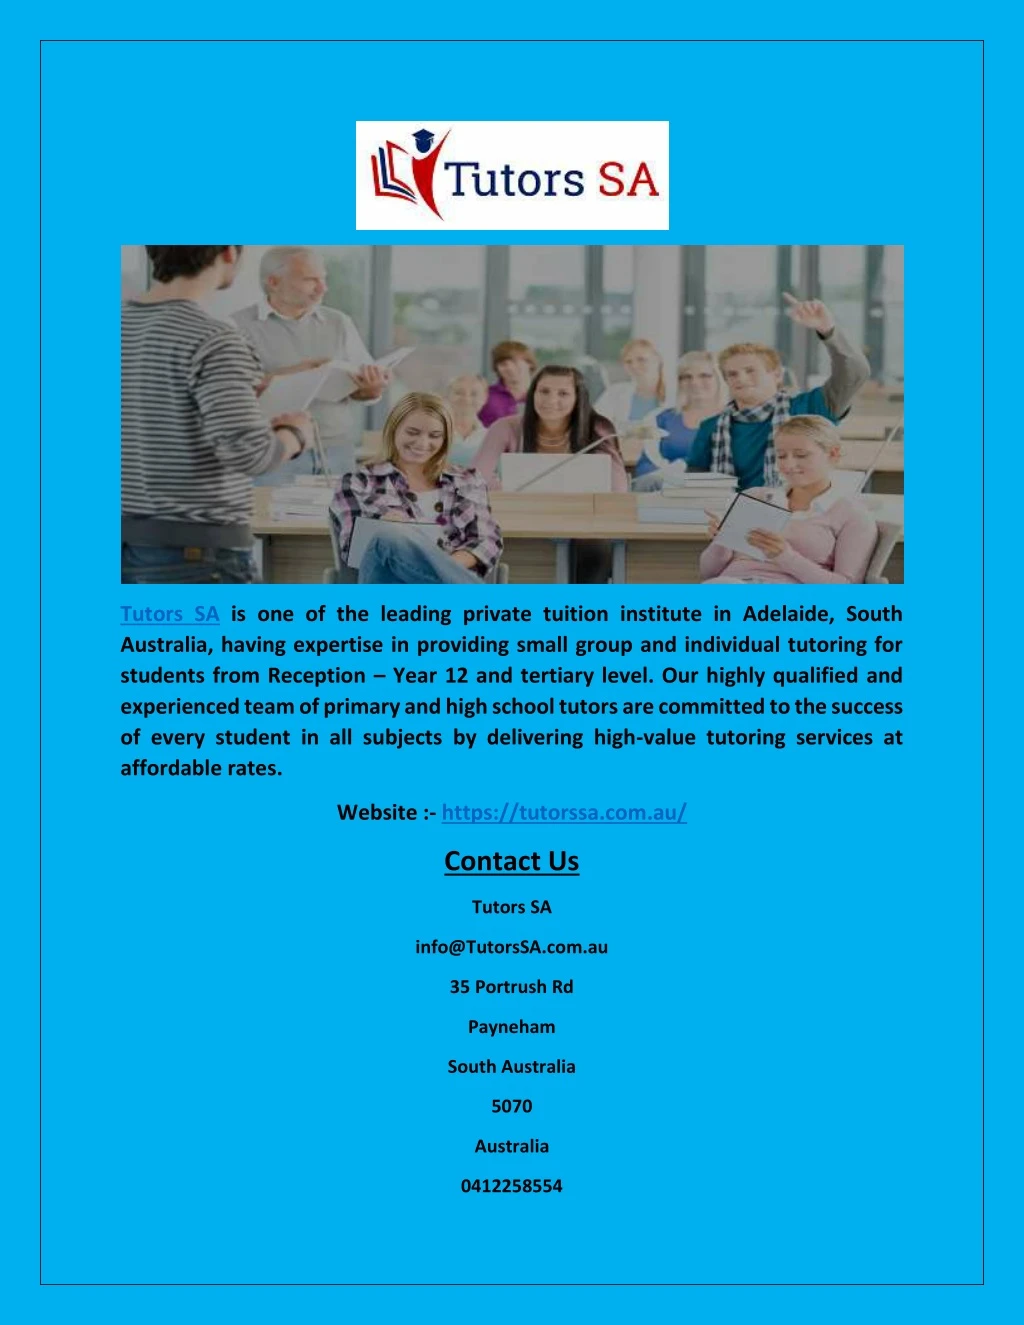 tutors sa is one of the leading private tuition